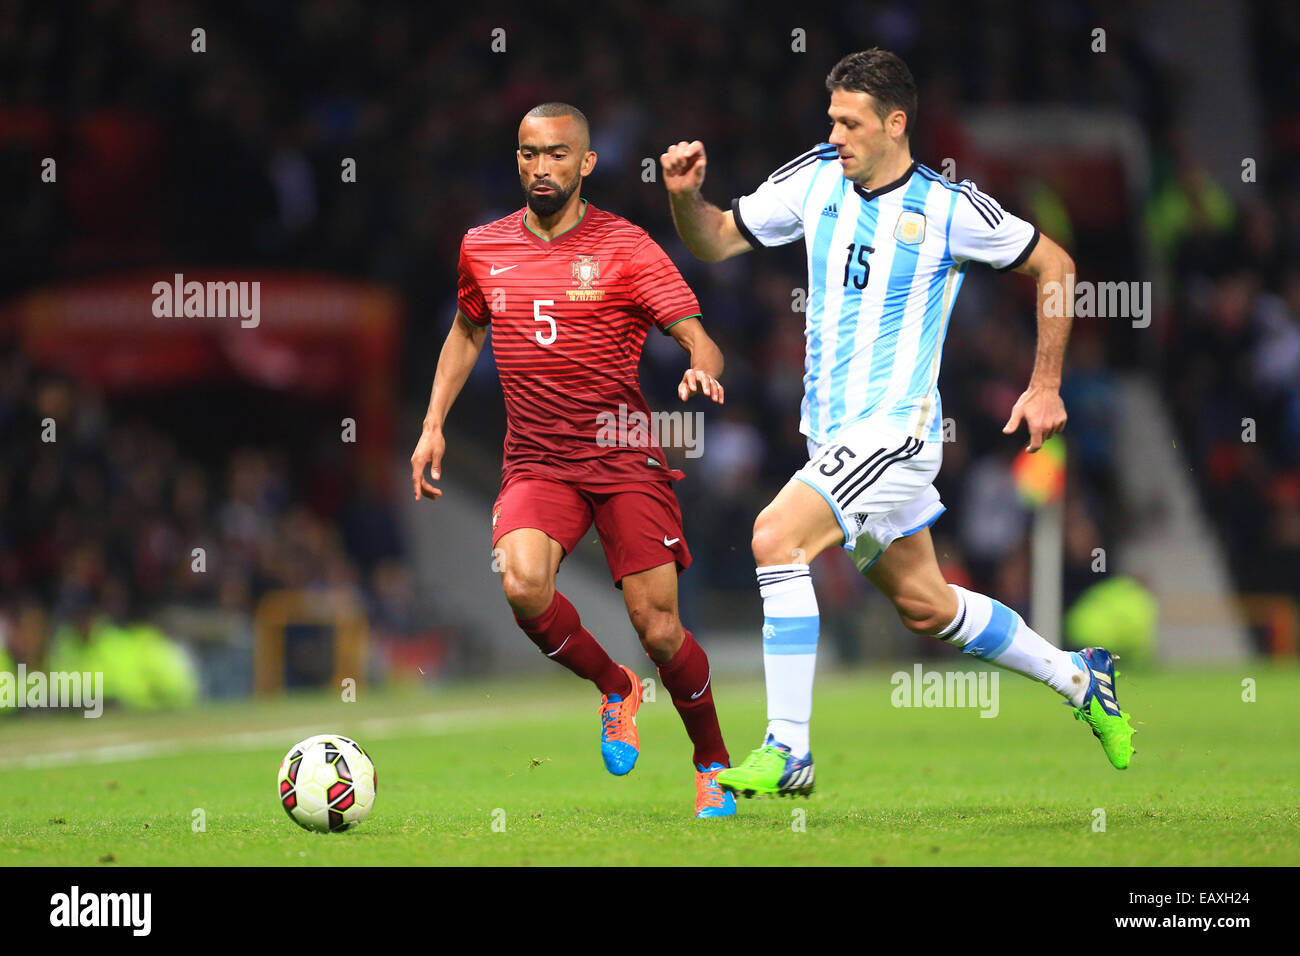 Manchester, UK. 18th Nov, 2014. Jose Bosingwa of Portugal and Martin Demichelis of Argentina - Argentina vs. Portugal - International Friendly - Old Trafford - Manchester - 18/11/2014 Pic Philip Oldham/Sportimage © csm/Alamy Live News Stock Photo